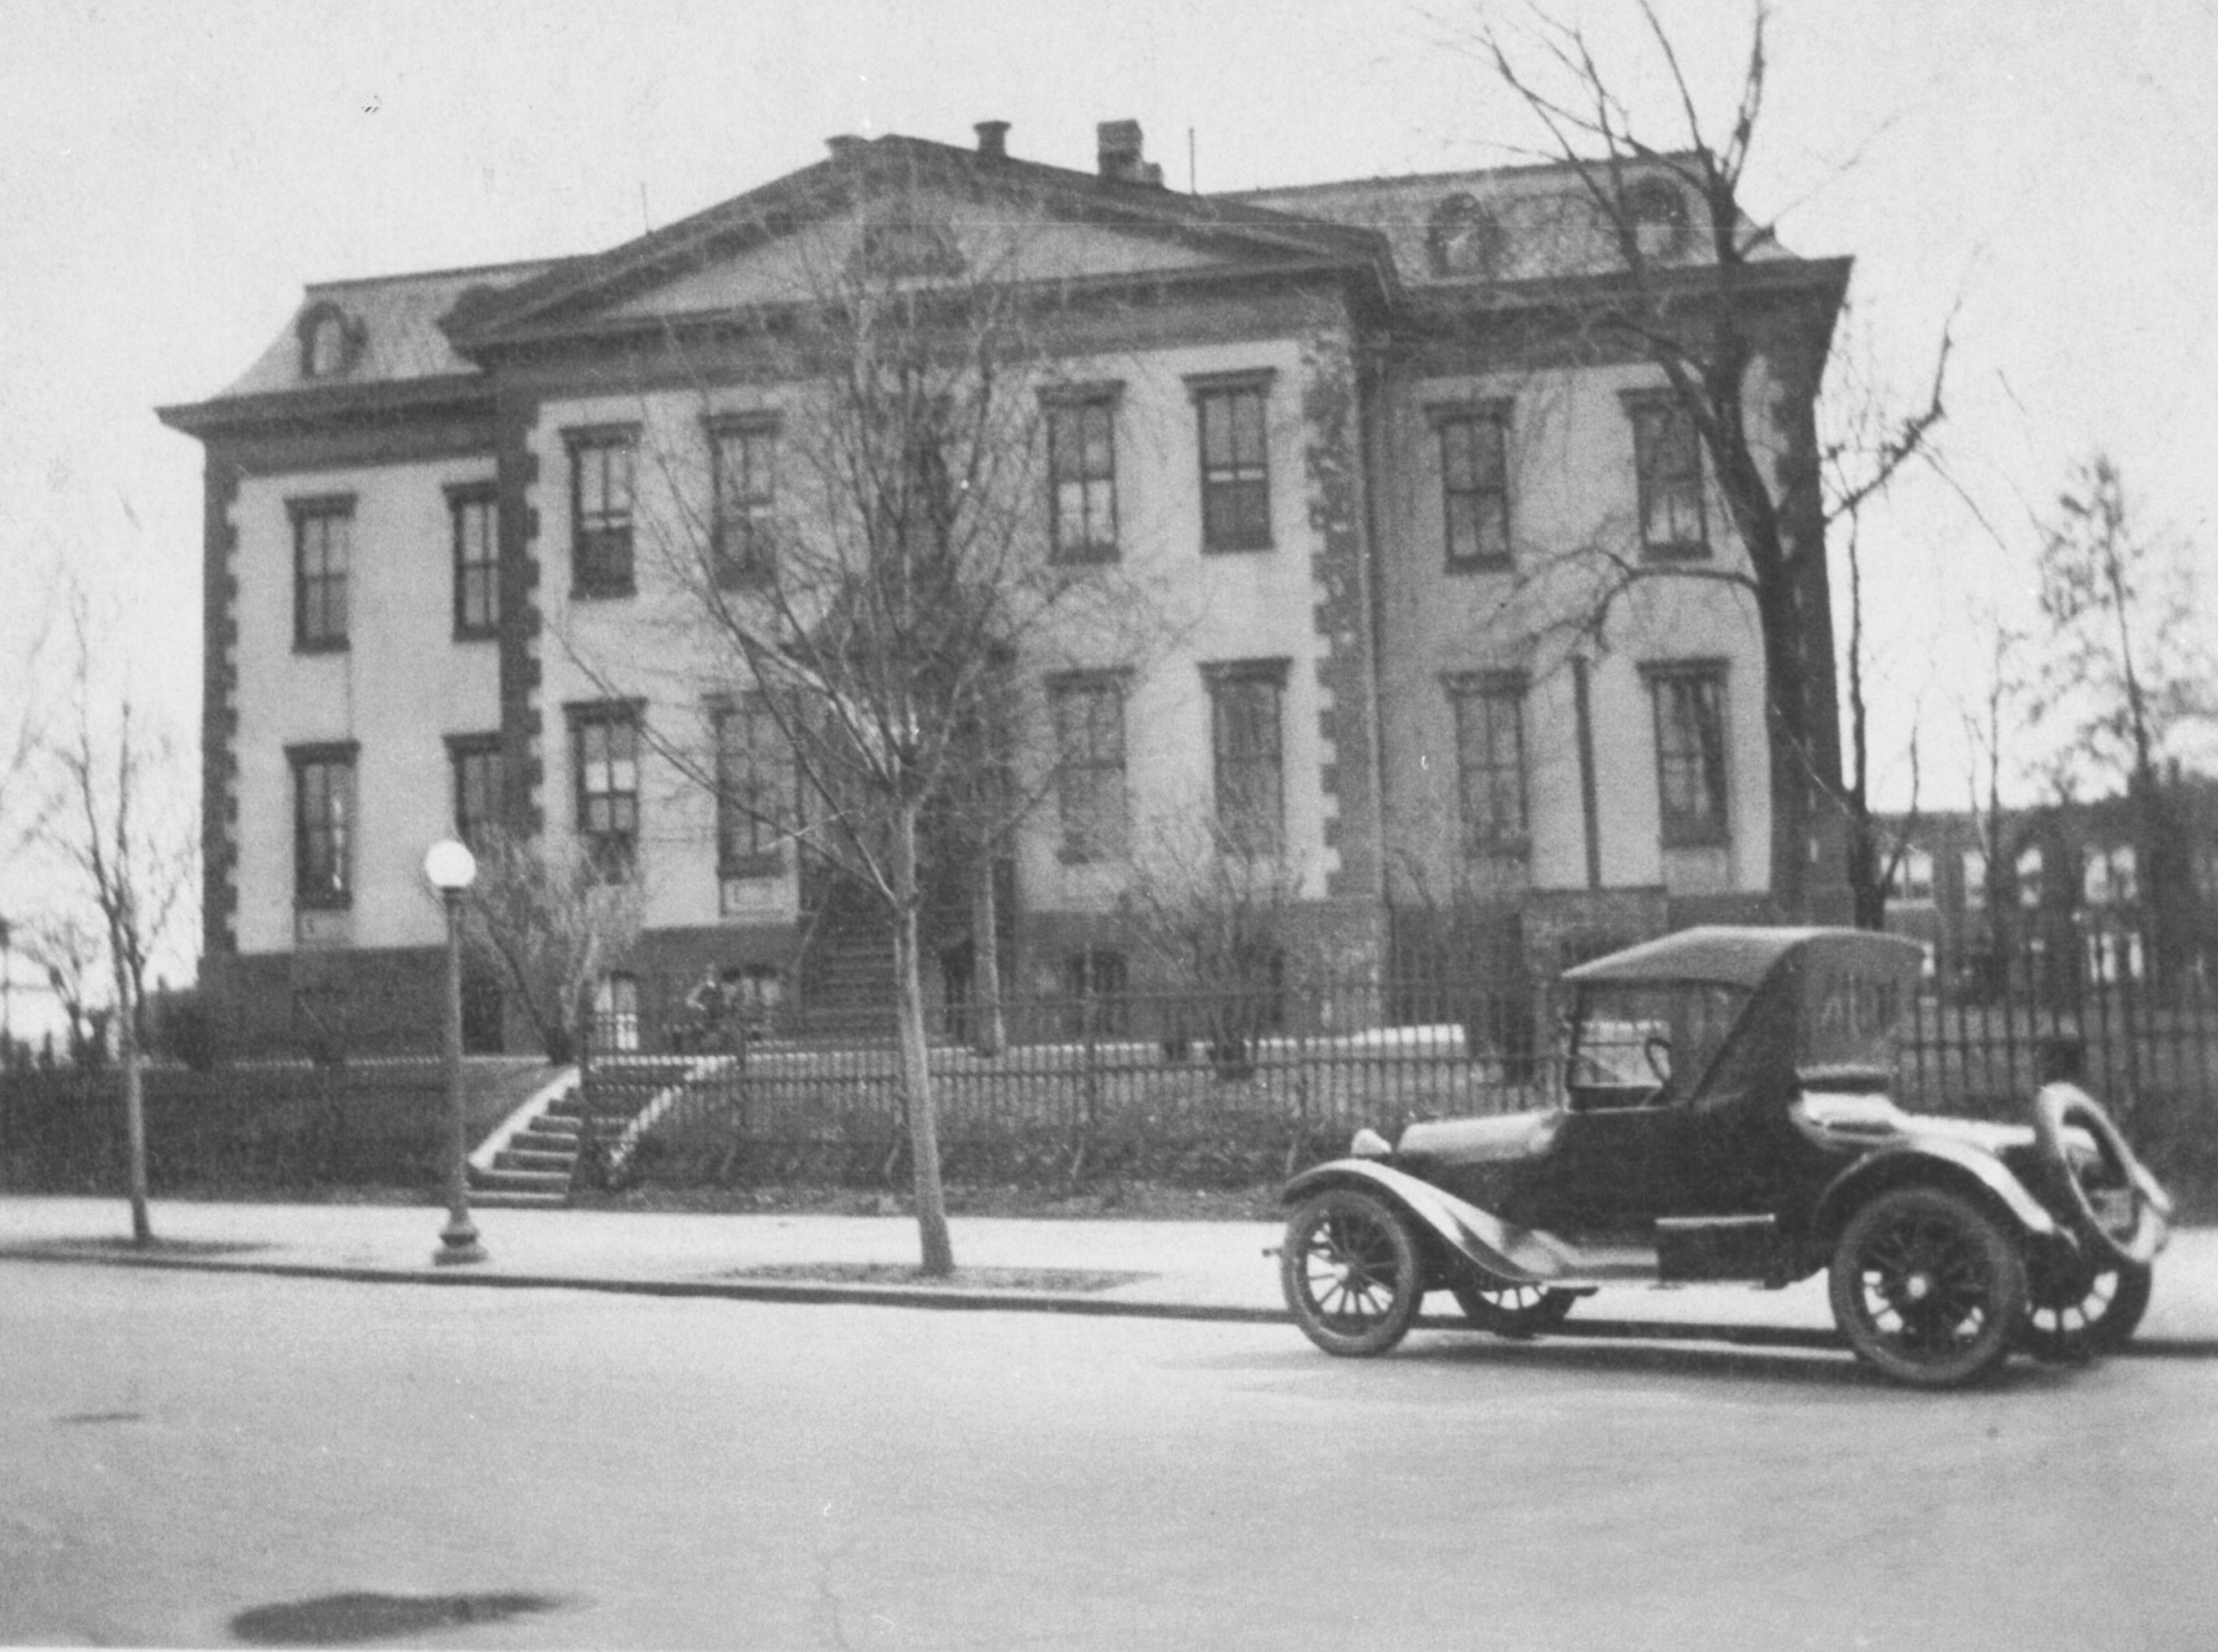 Undated photograph of the of the Old Naval Hospital from the North 